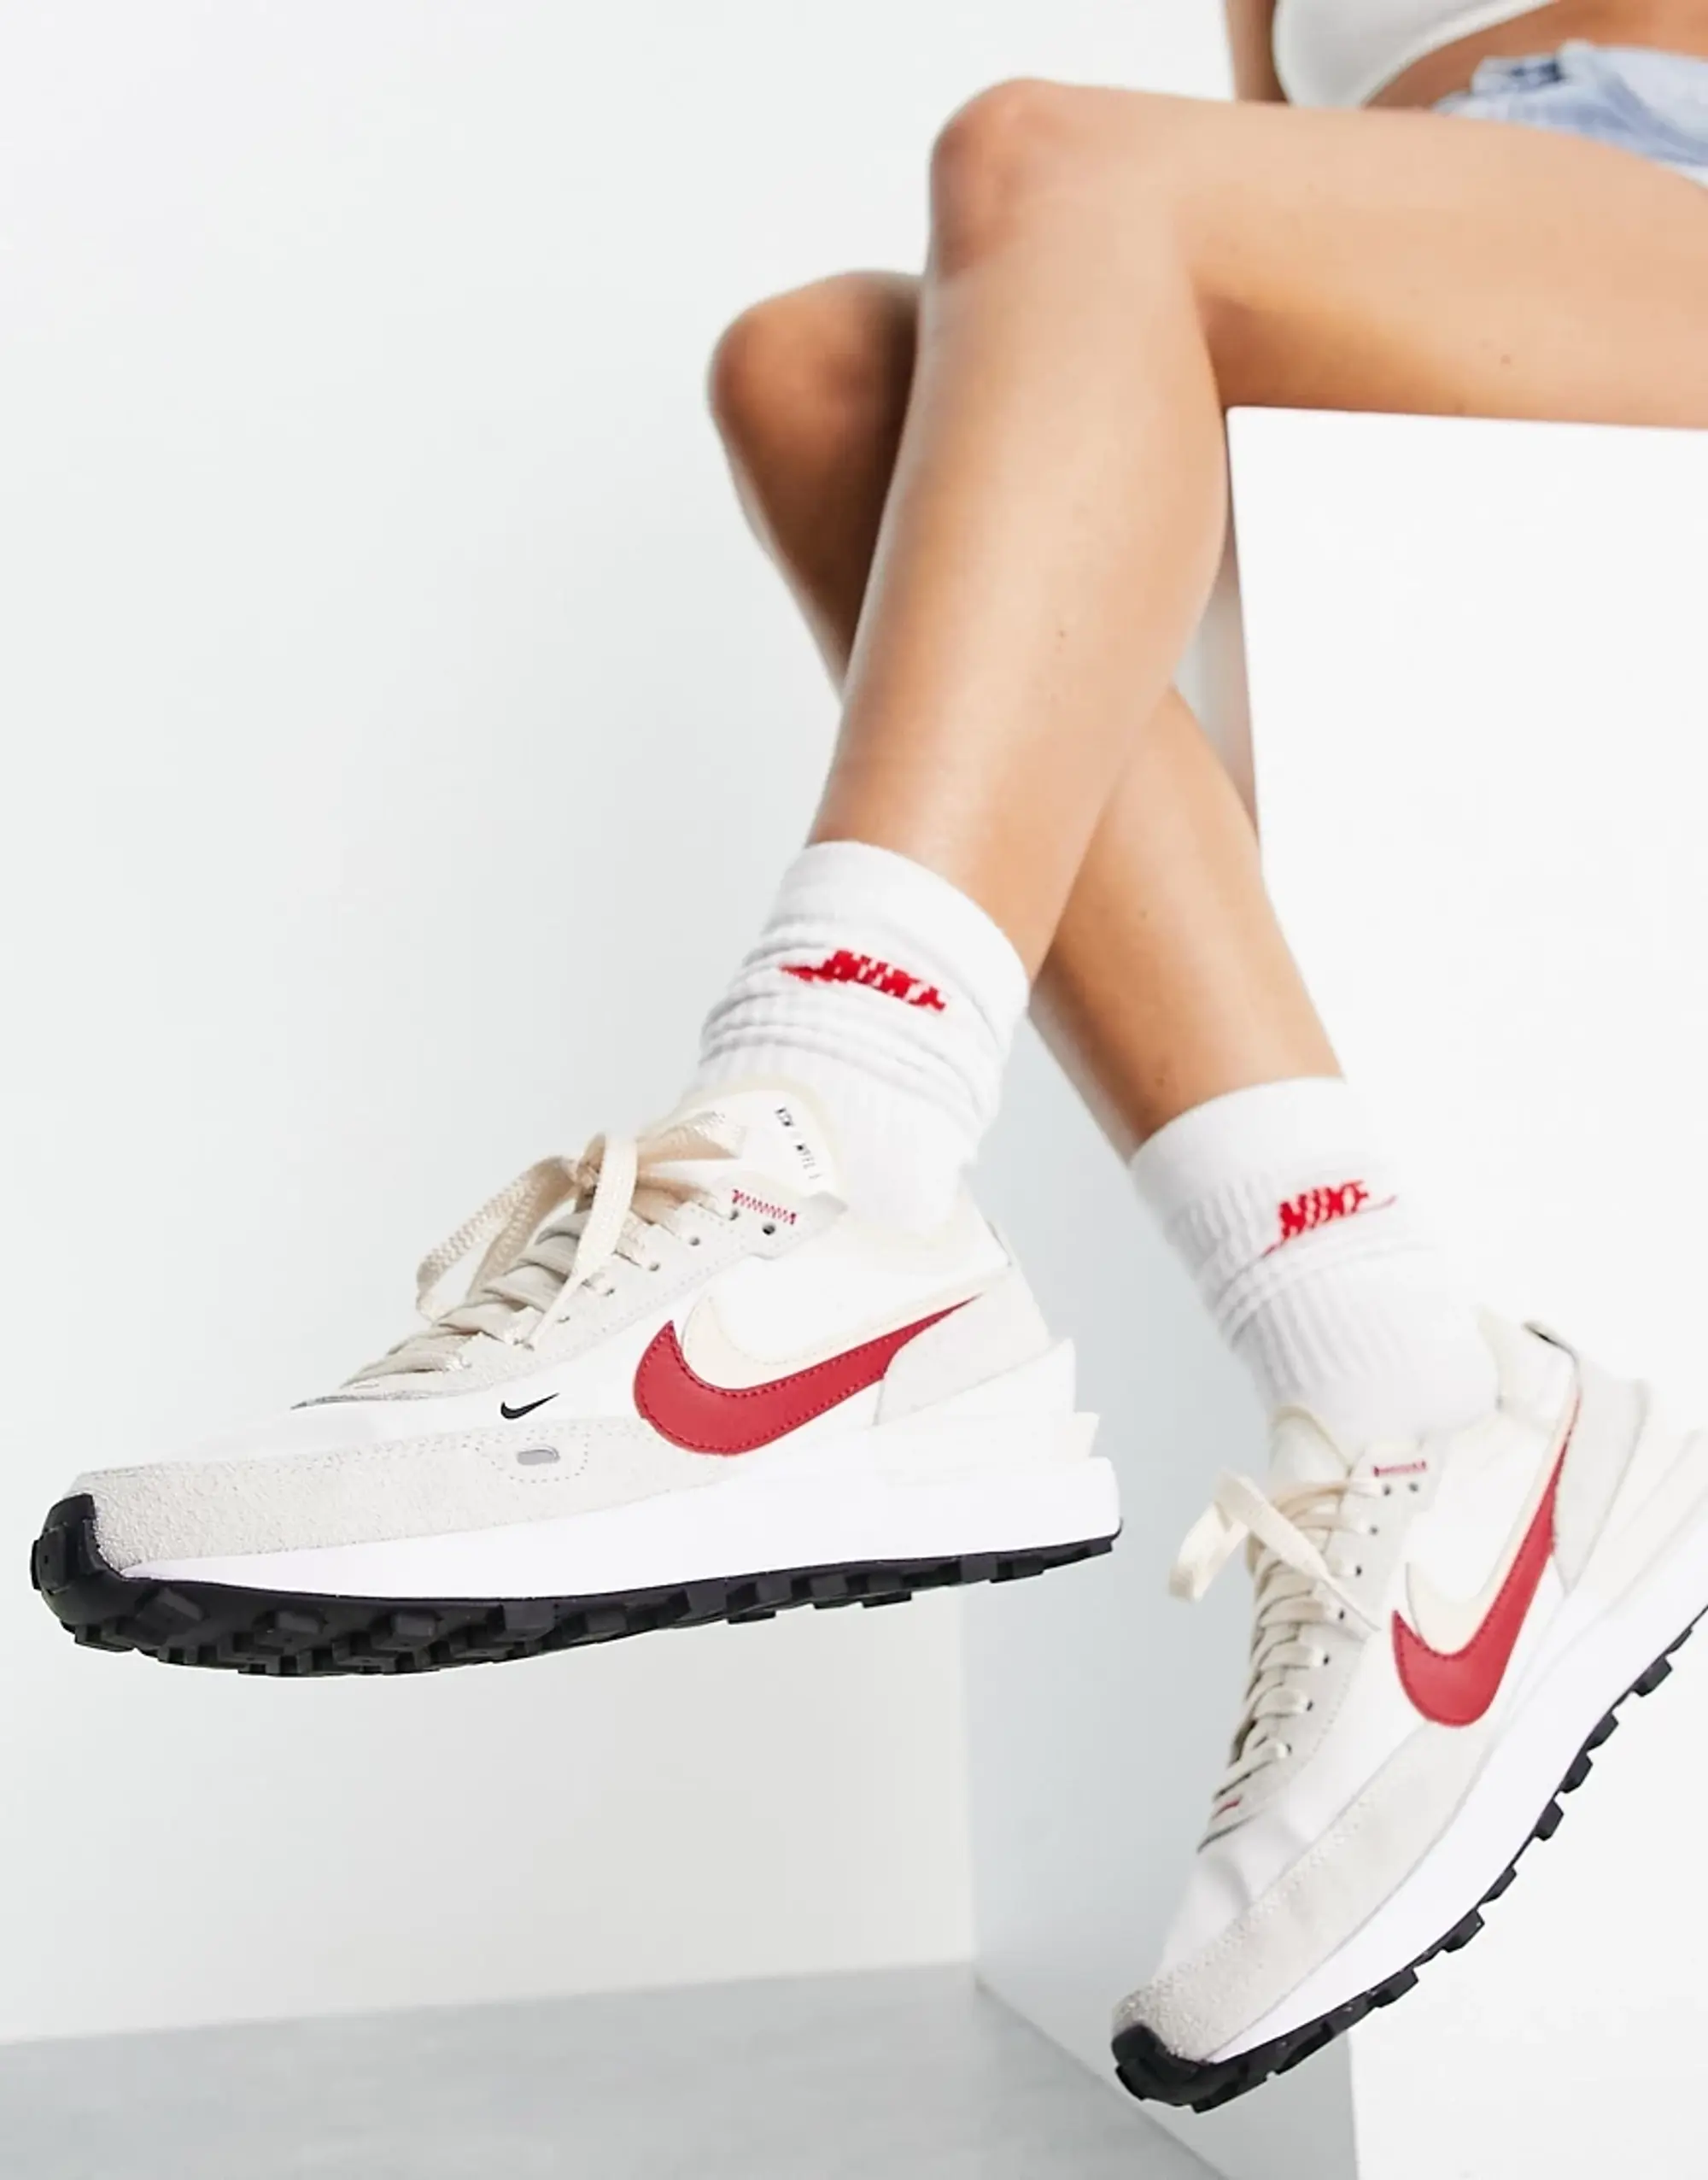 Nike Waffle One Se Trainers In Cream And Gym Red.-White